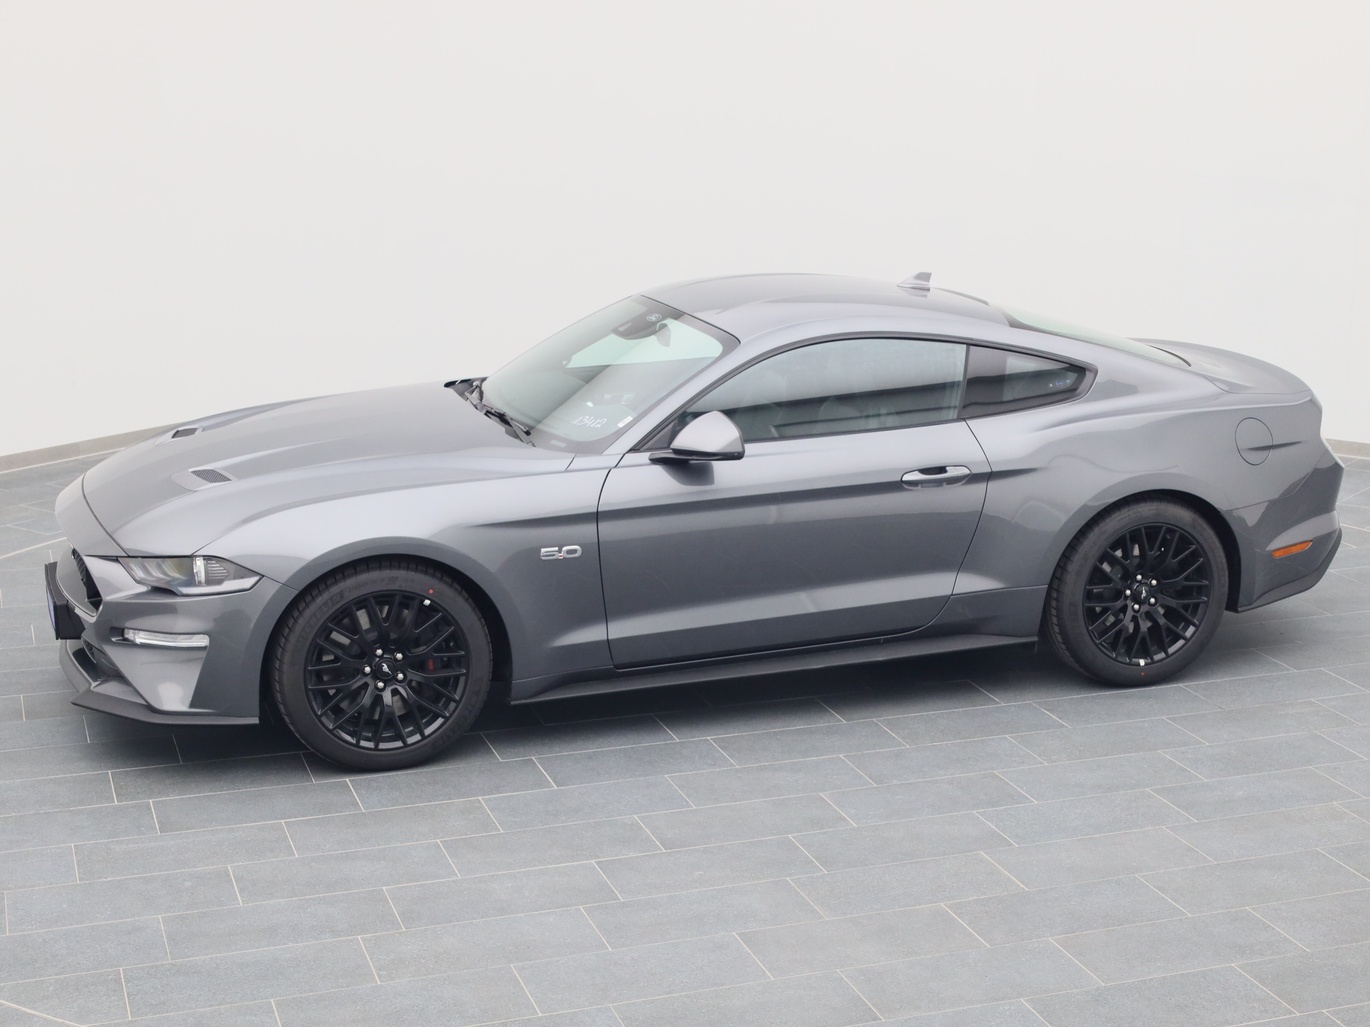  Ford Mustang GT Coupé V8 450PS / Premium 2 / B&O in Carbonized Gray 